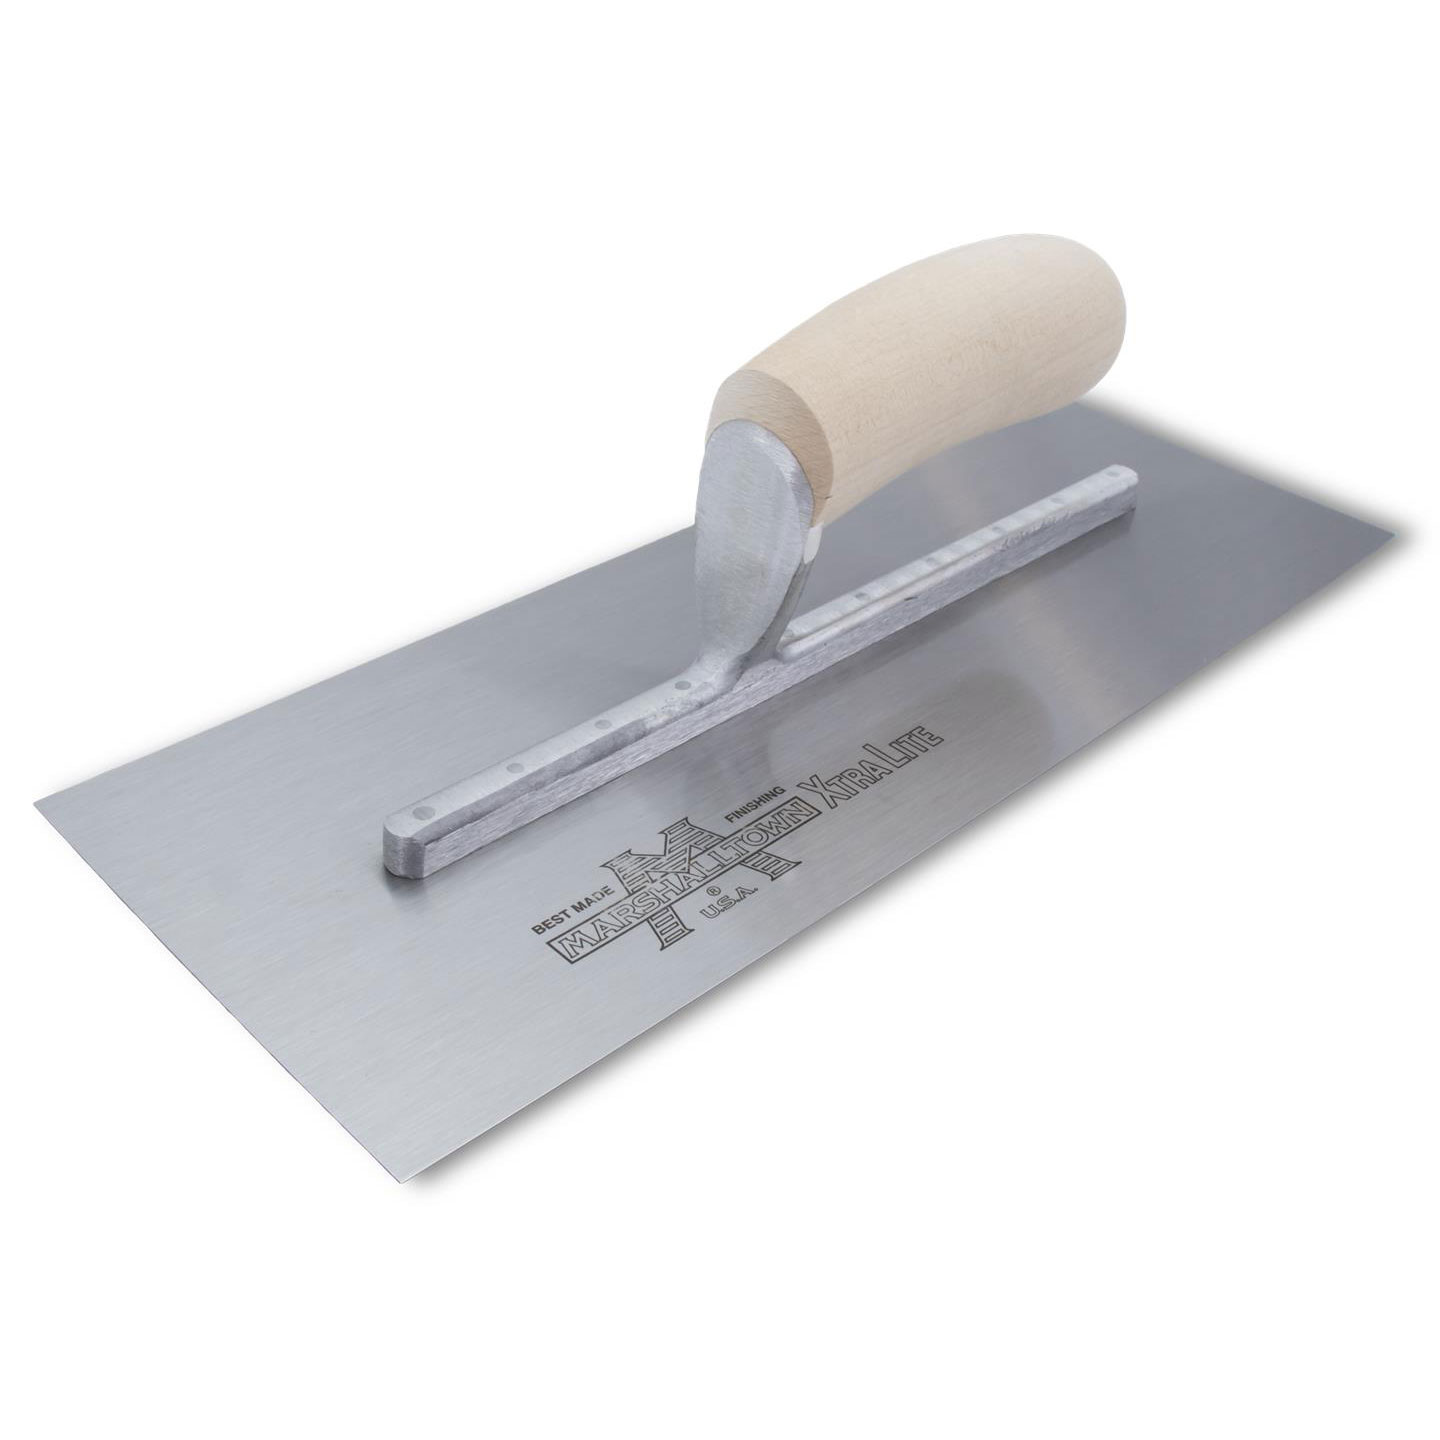 Marshalltown MX73 14in x 4-3/4in Finishing Trowel with Straight Wood Handle MX73